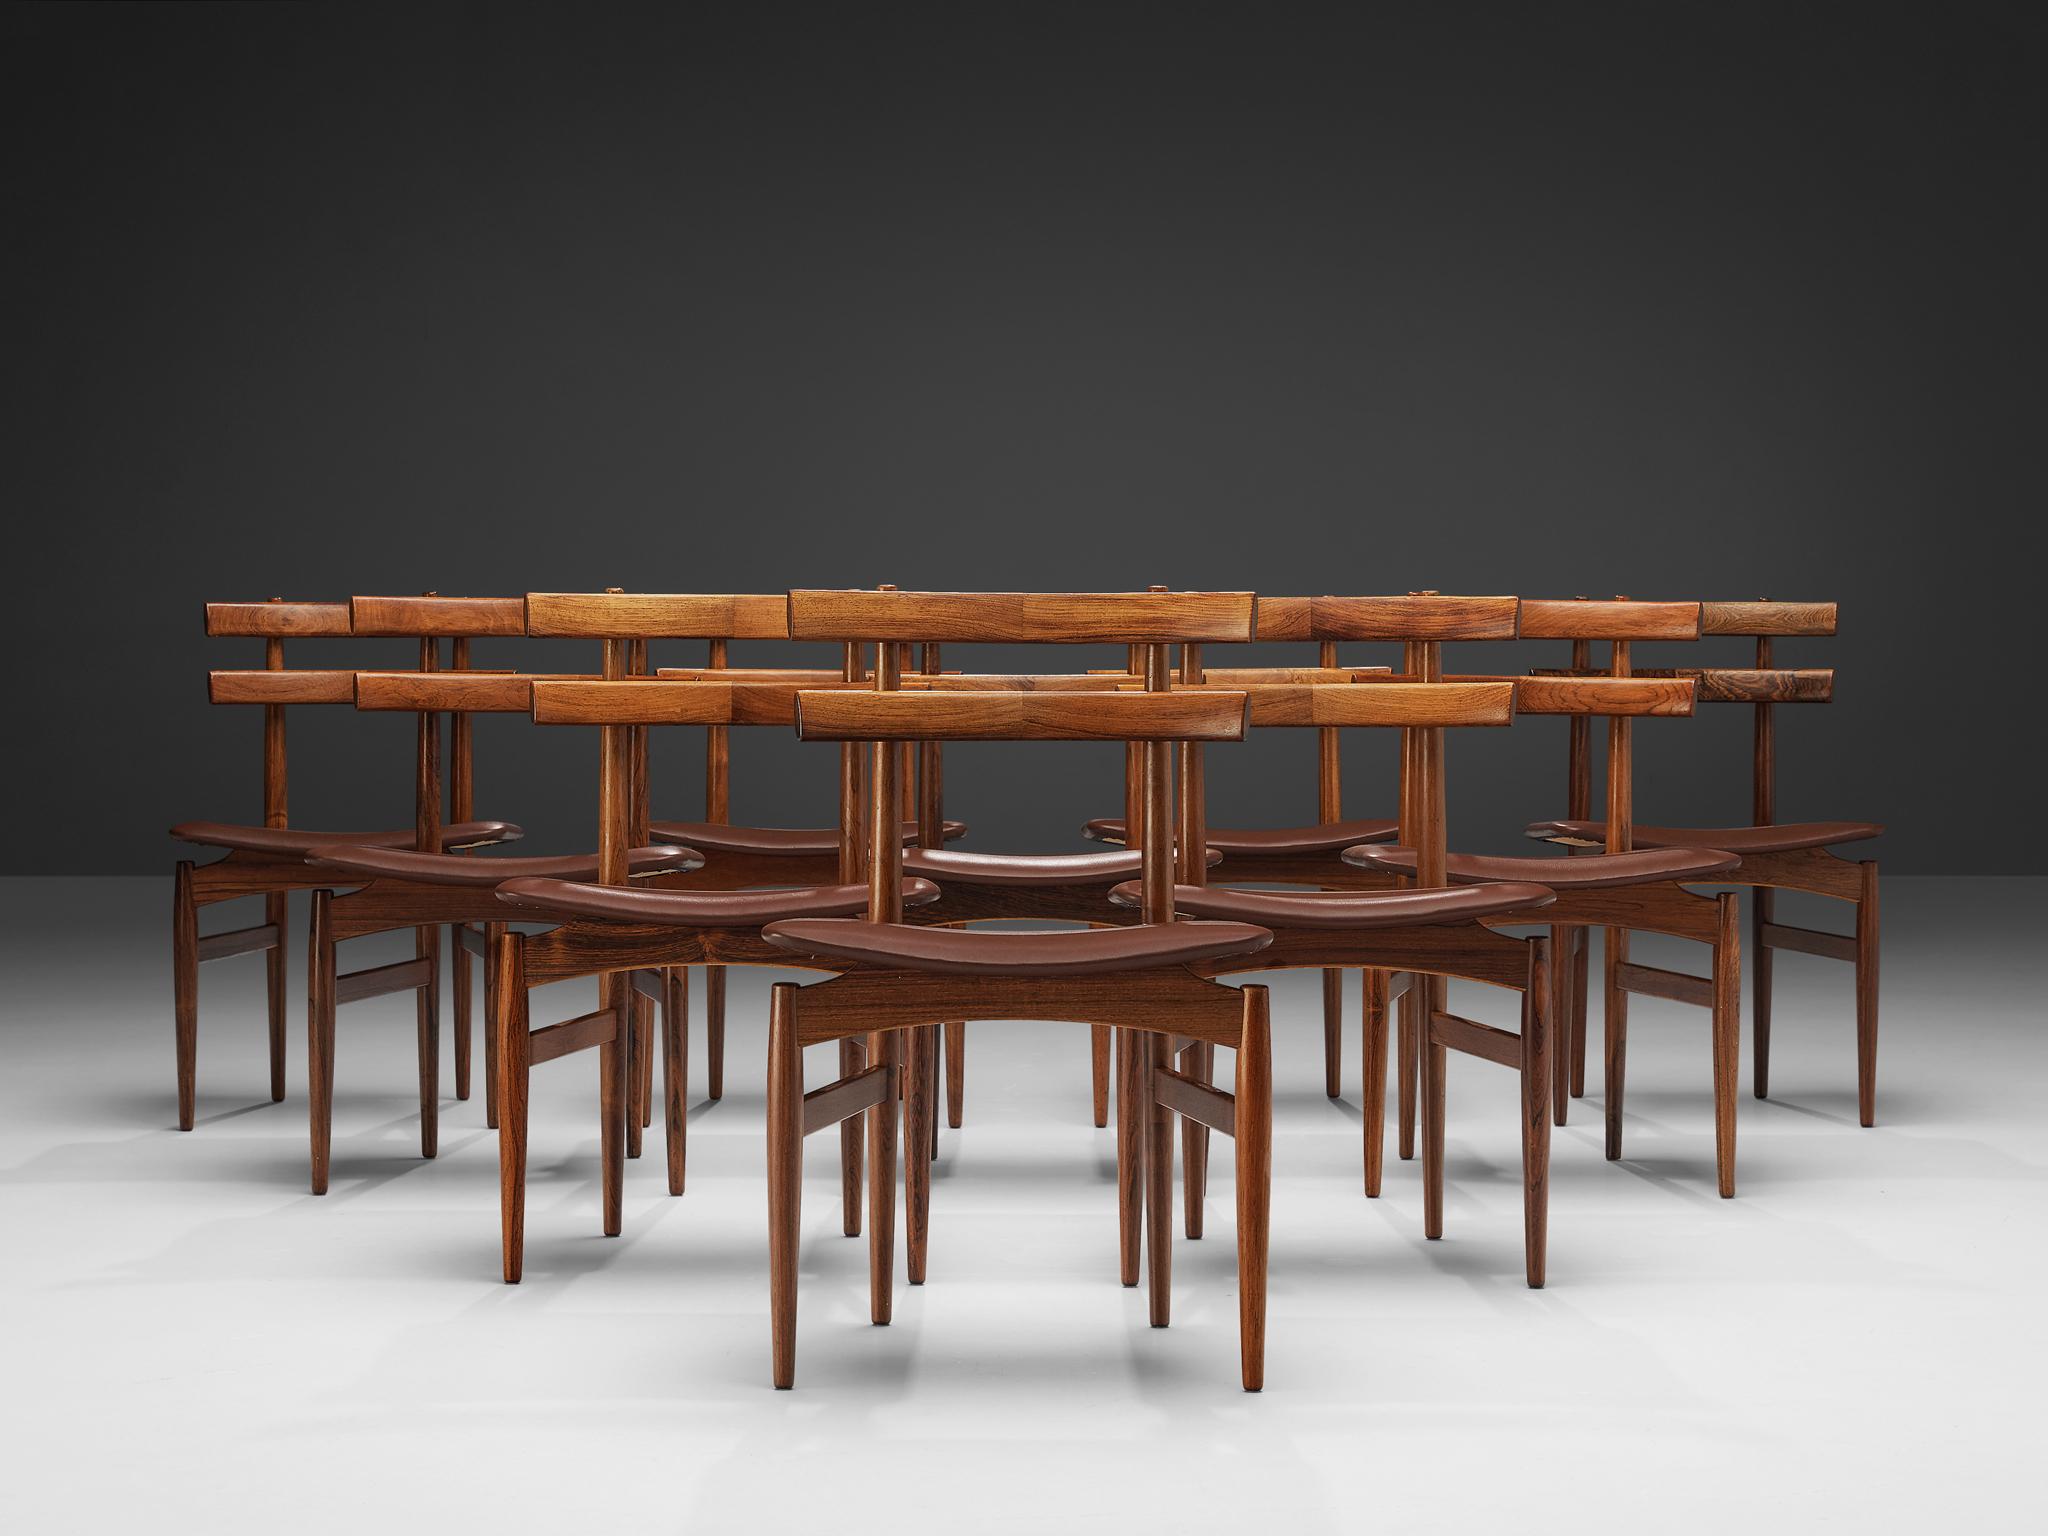 Poul Hundevad for Poul Hundevad, set of ten dining chairs model 30, rosewood, leather upholstery, Denmark, 1958
 
Designed and manufactured by Poul Hundevad the dining chairs model 30 are a great example of Scandinavian Modern design. Executed in